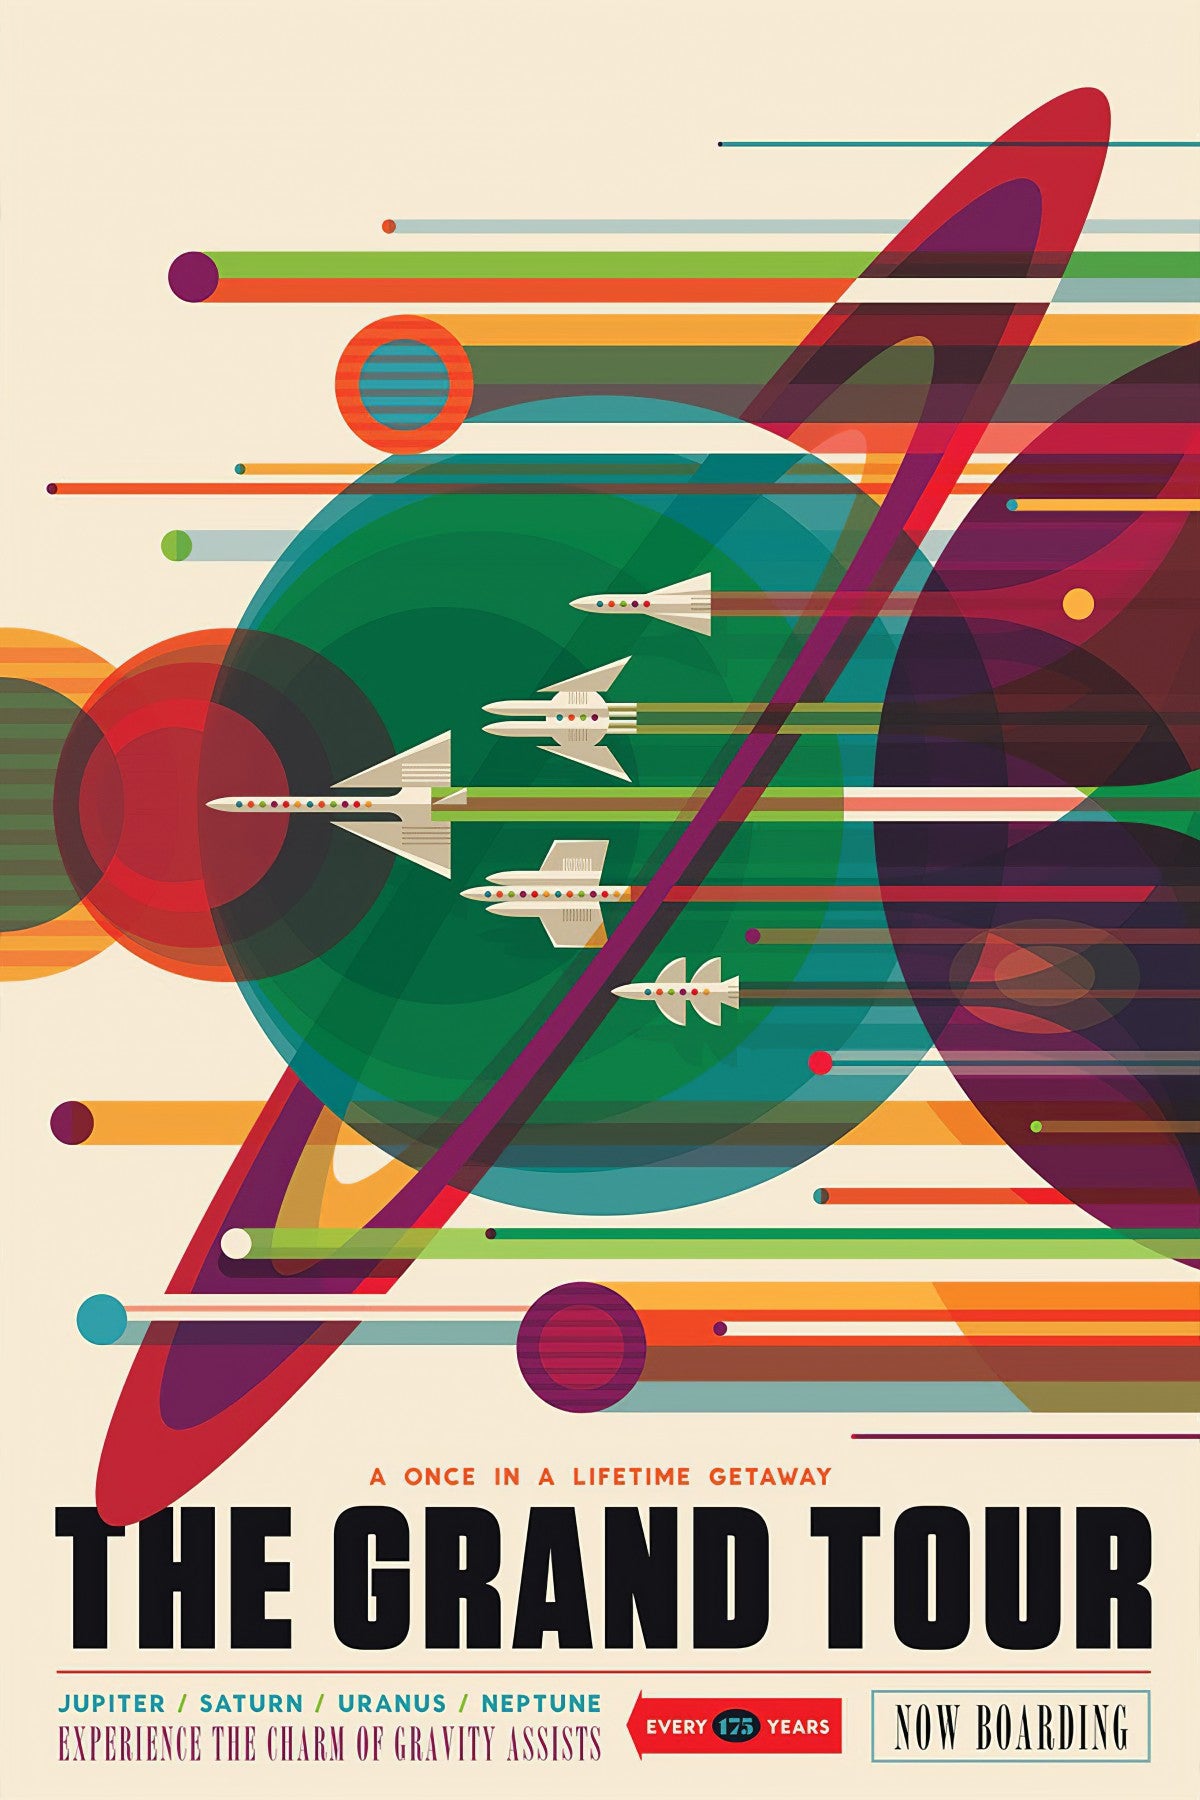 Visions of the Future NASA space exploration poster